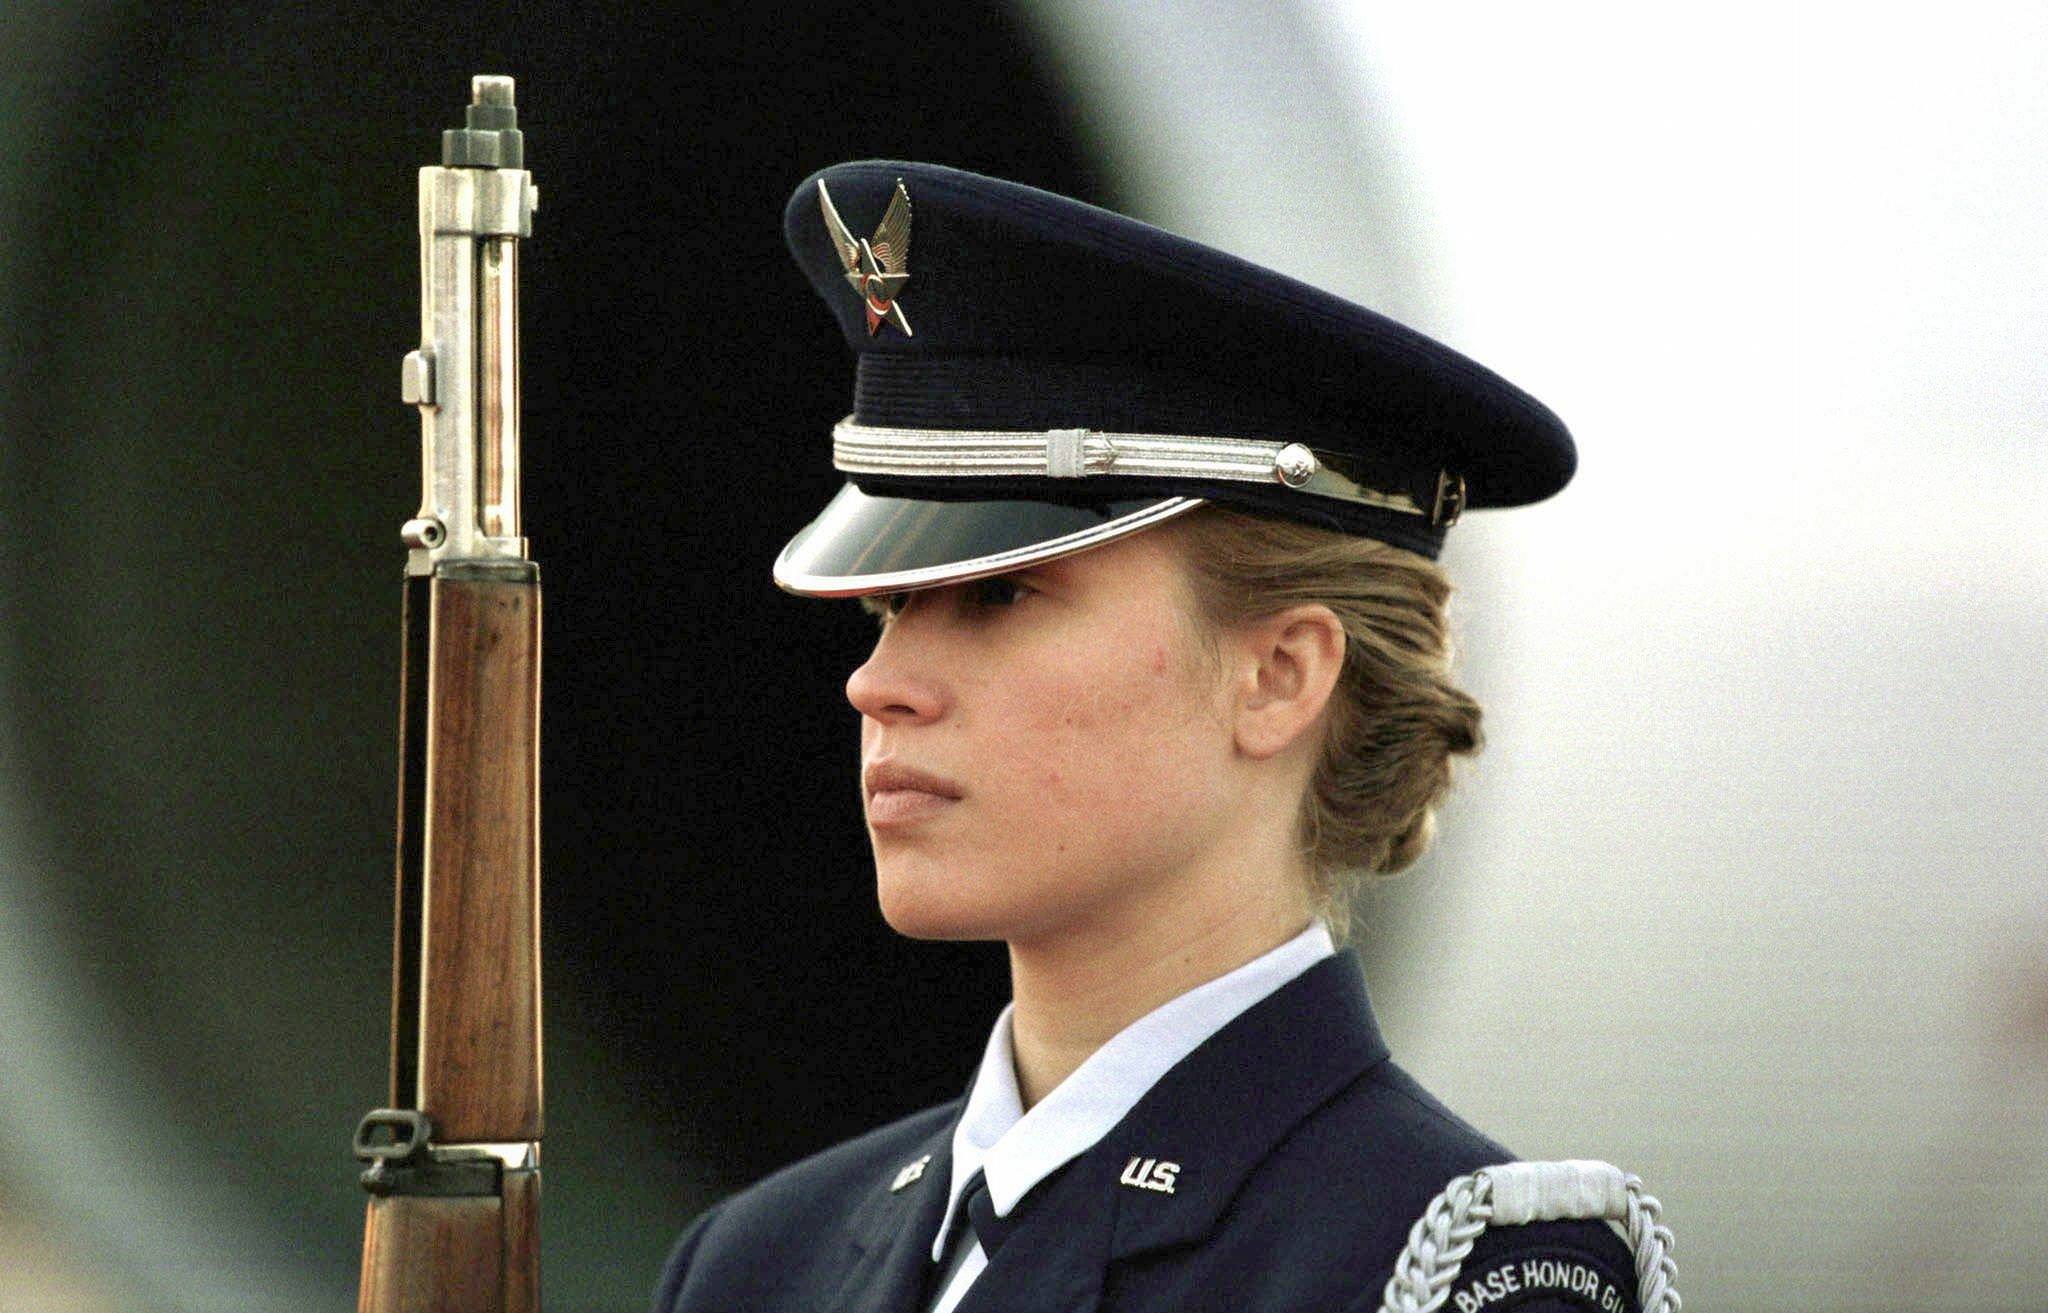 A female US soldier at the Naval Air Sation in Norfolk, 1990s